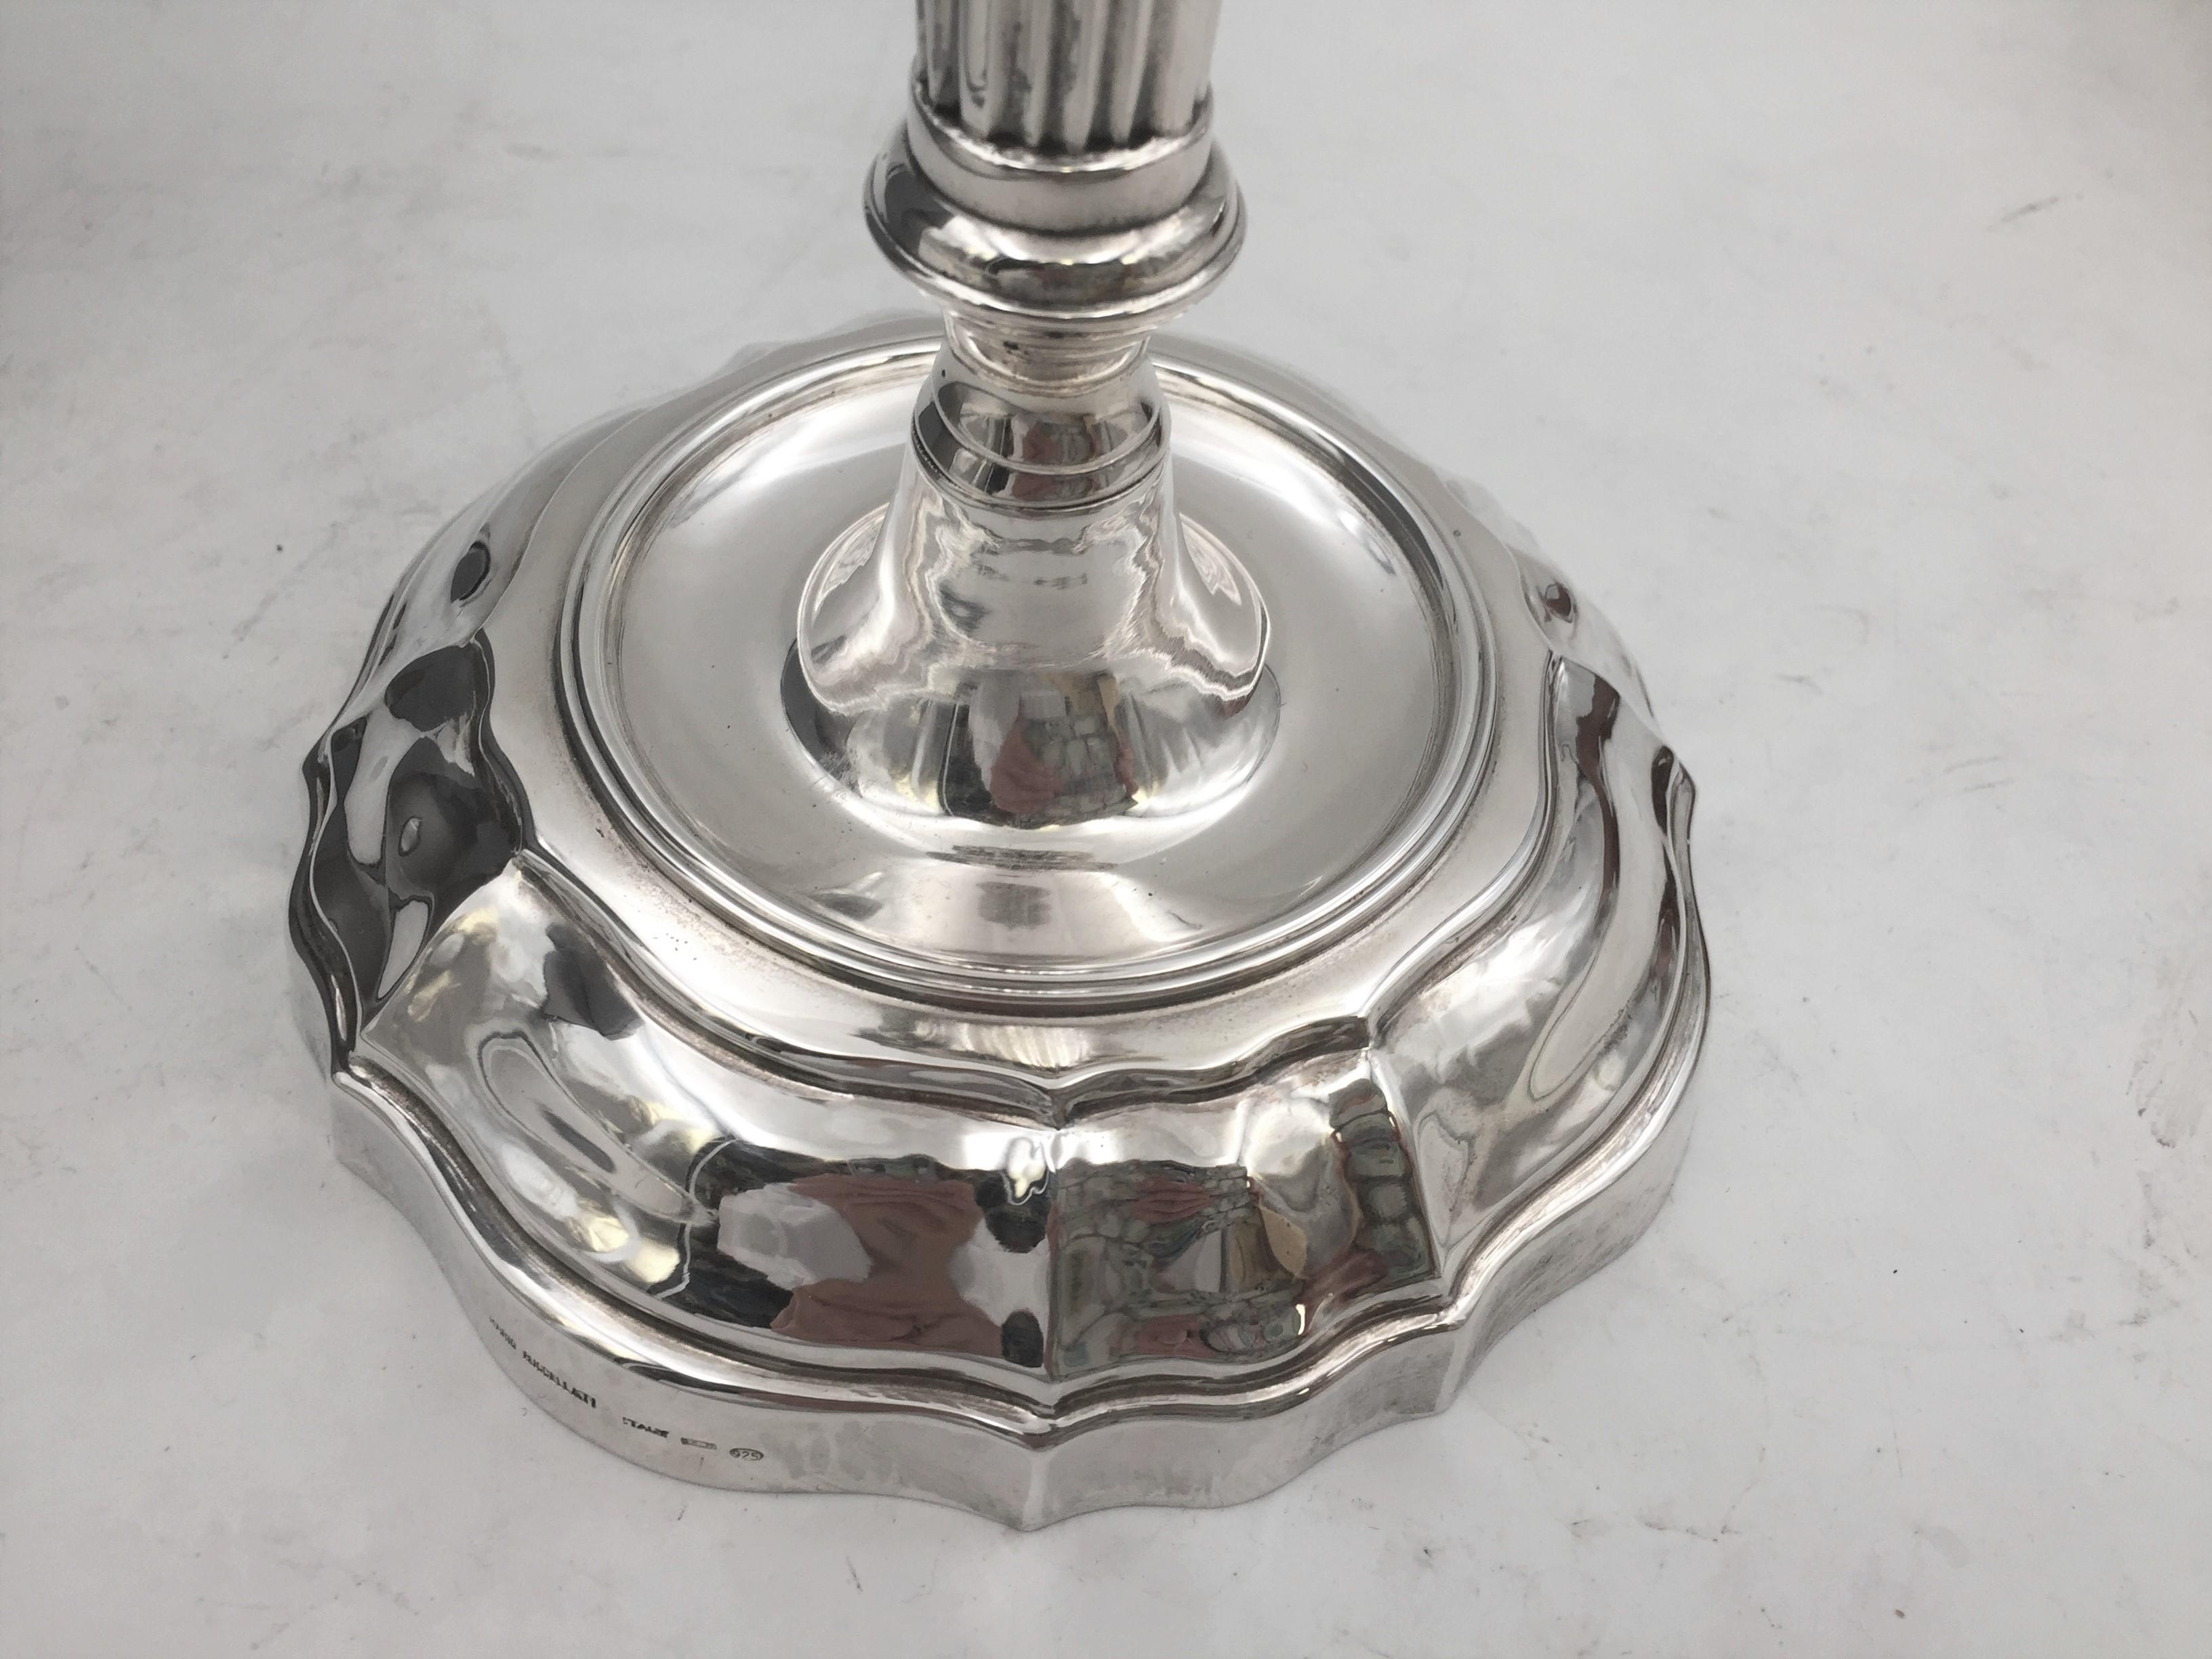 Sterling silver candlestick by the Italian maker Mario Buccellati, new in original Buccellati box. Retails around $4000. Designed with a knopped stem and a wavy bobéches. Measuring 7 1/4 inches tall and 5 1/4 inches wide at base. Weighing 17.2 troy